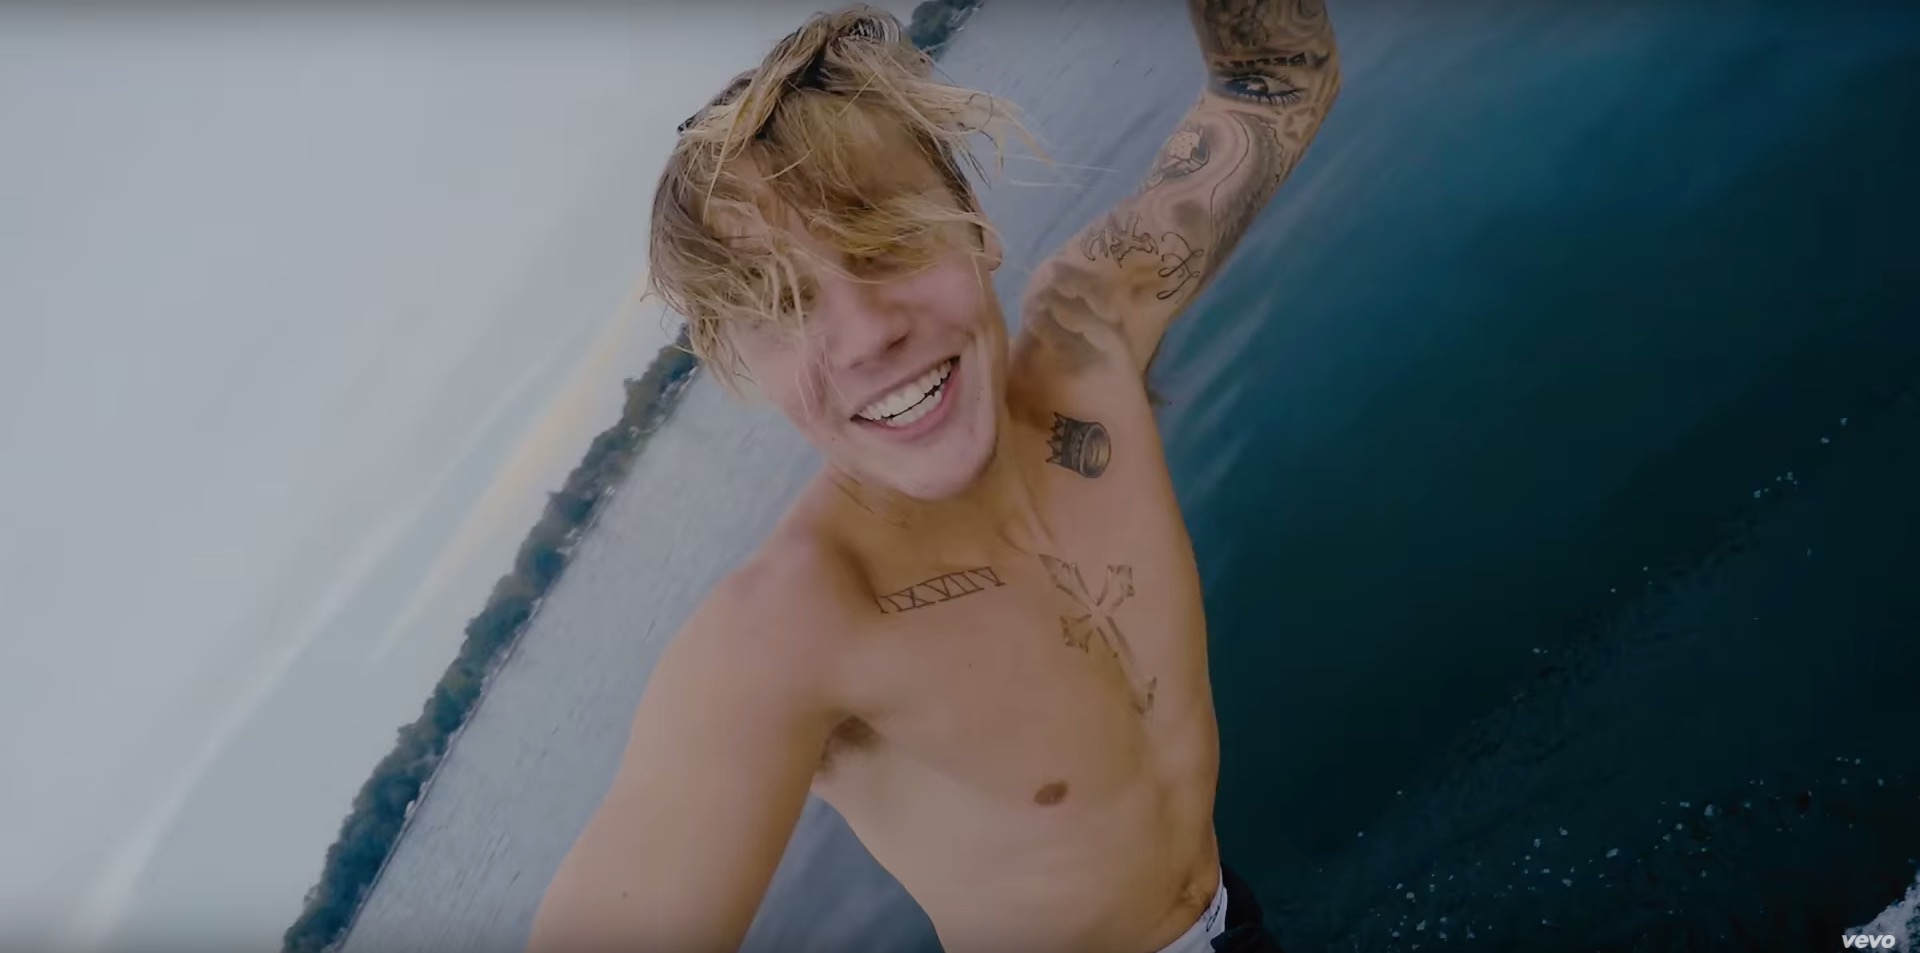 Justin Bieber Travels the World in New Music Video for ‘Company' | RTM - RightThisMinute